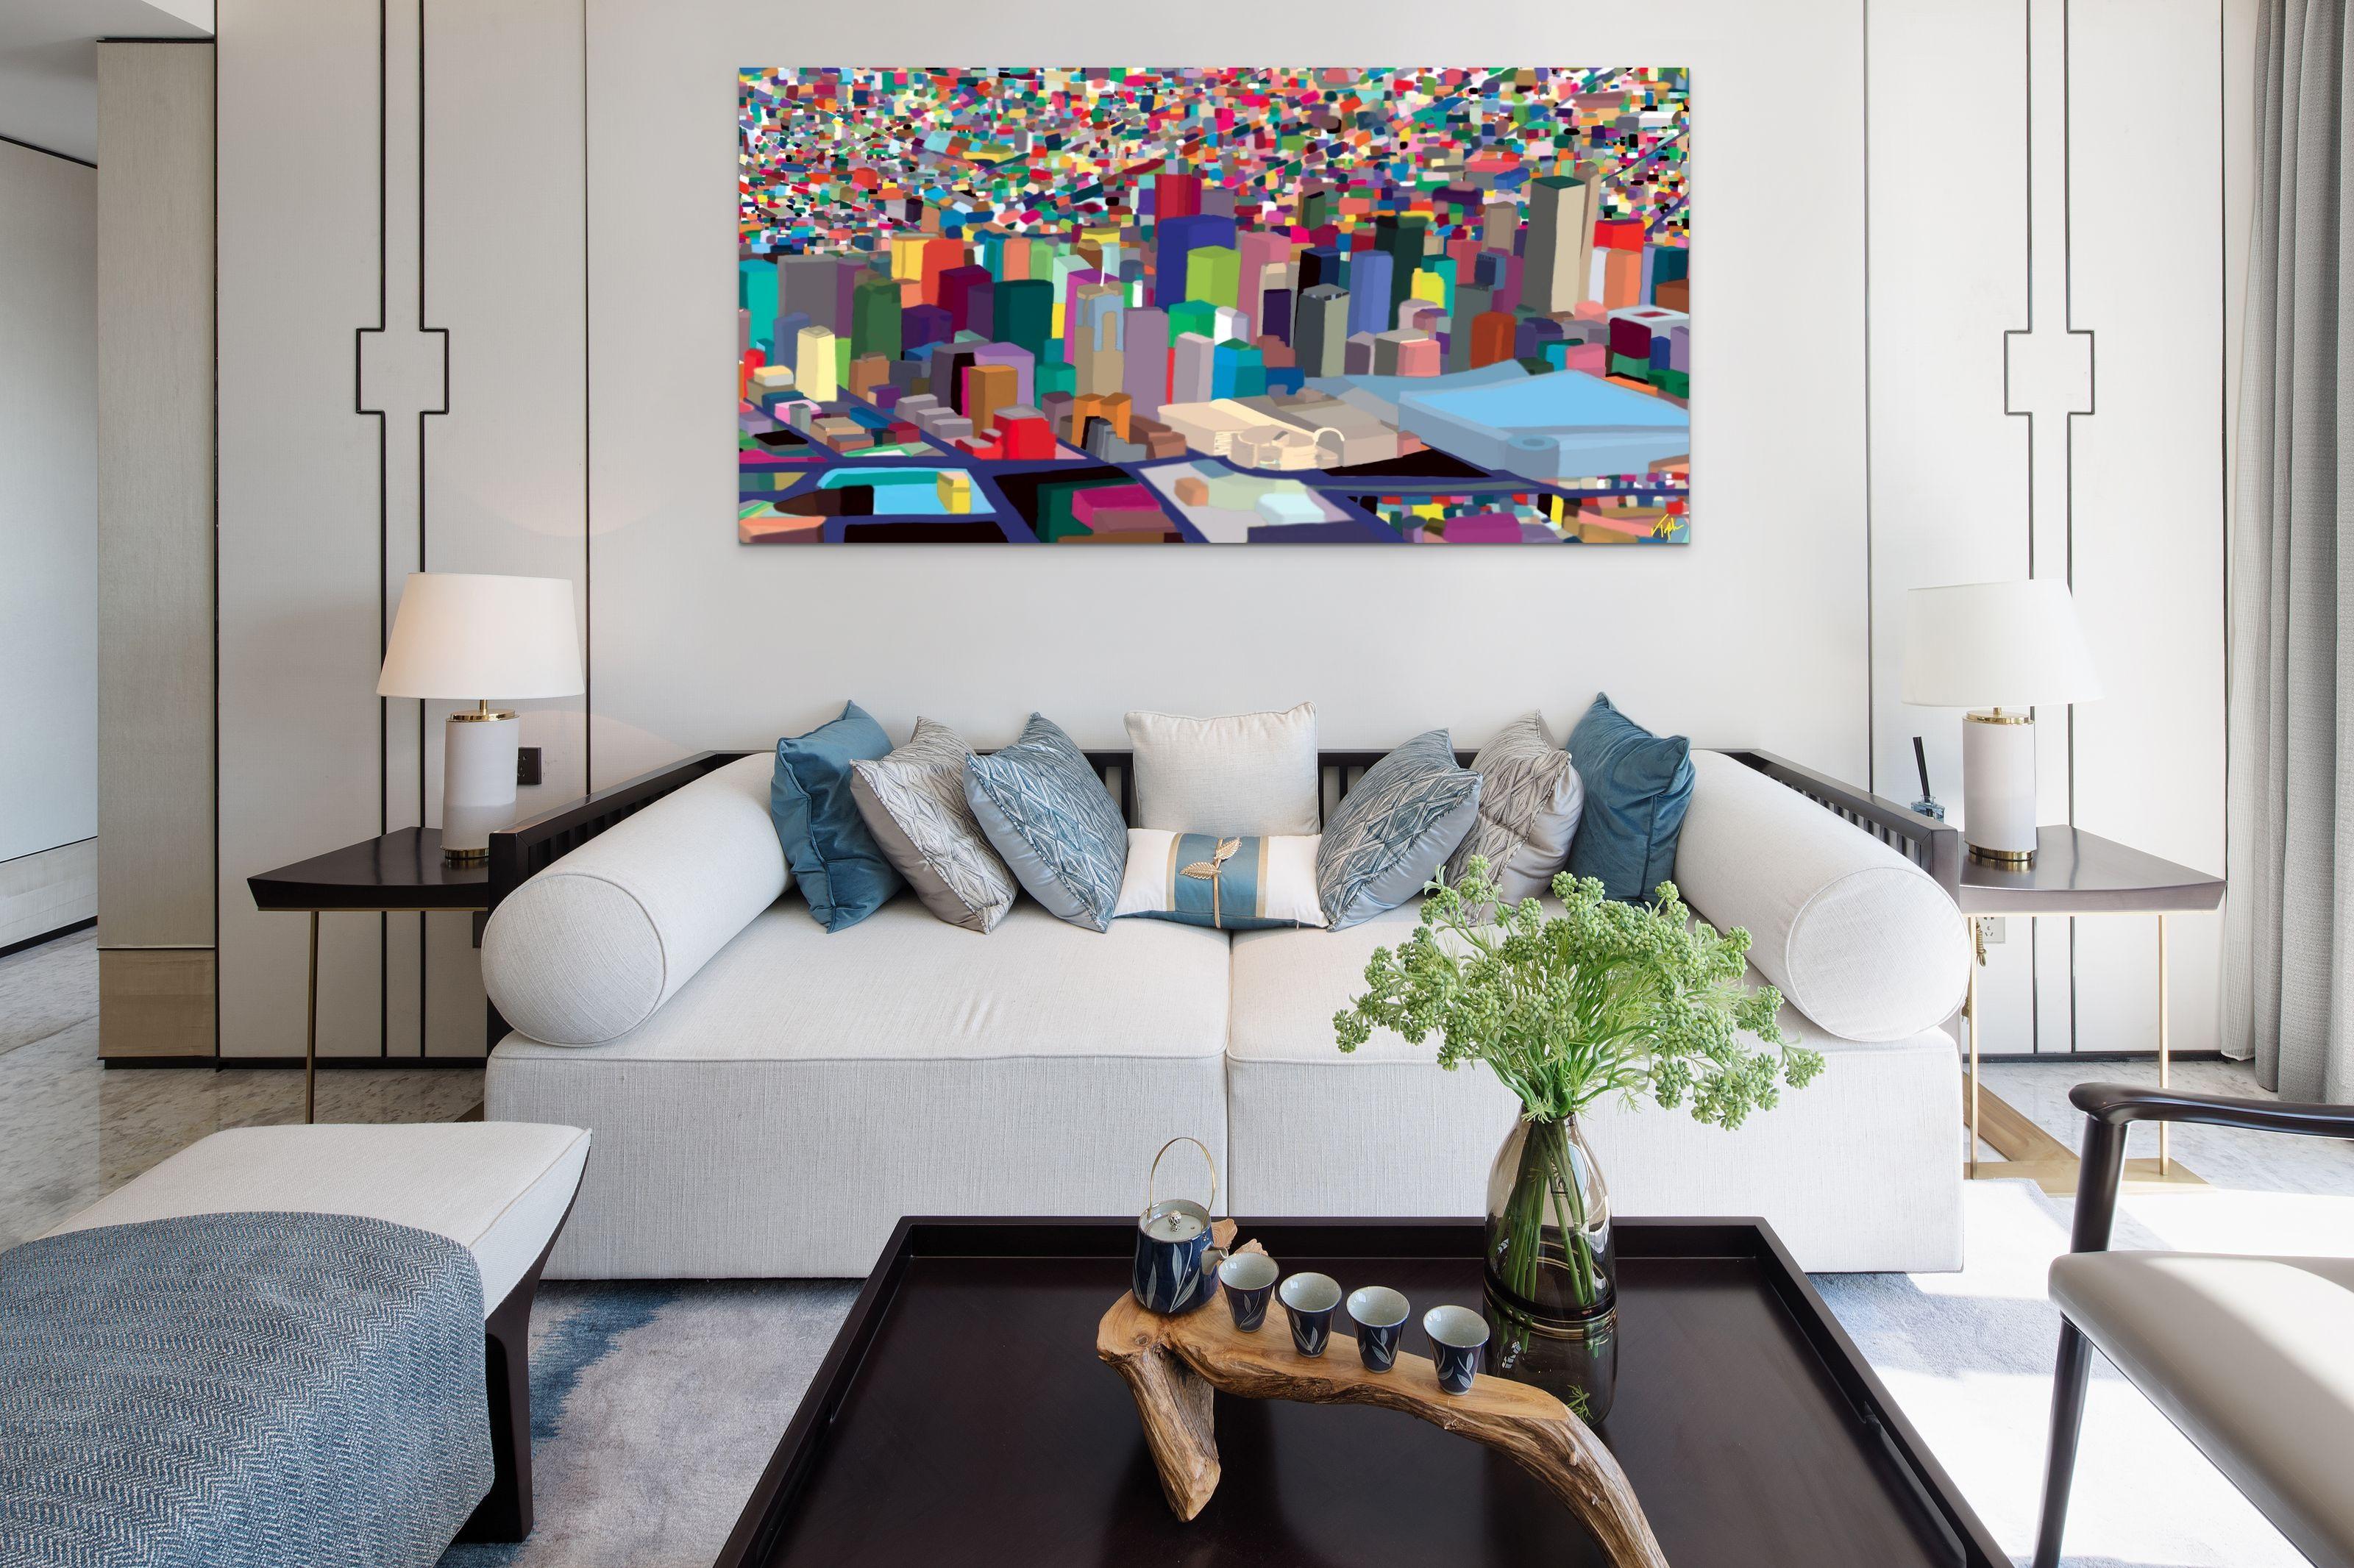 Denver Day, Original Modern Colorful Impressionist Cityscape Painting, Colorado - Photograph by Topher Straus